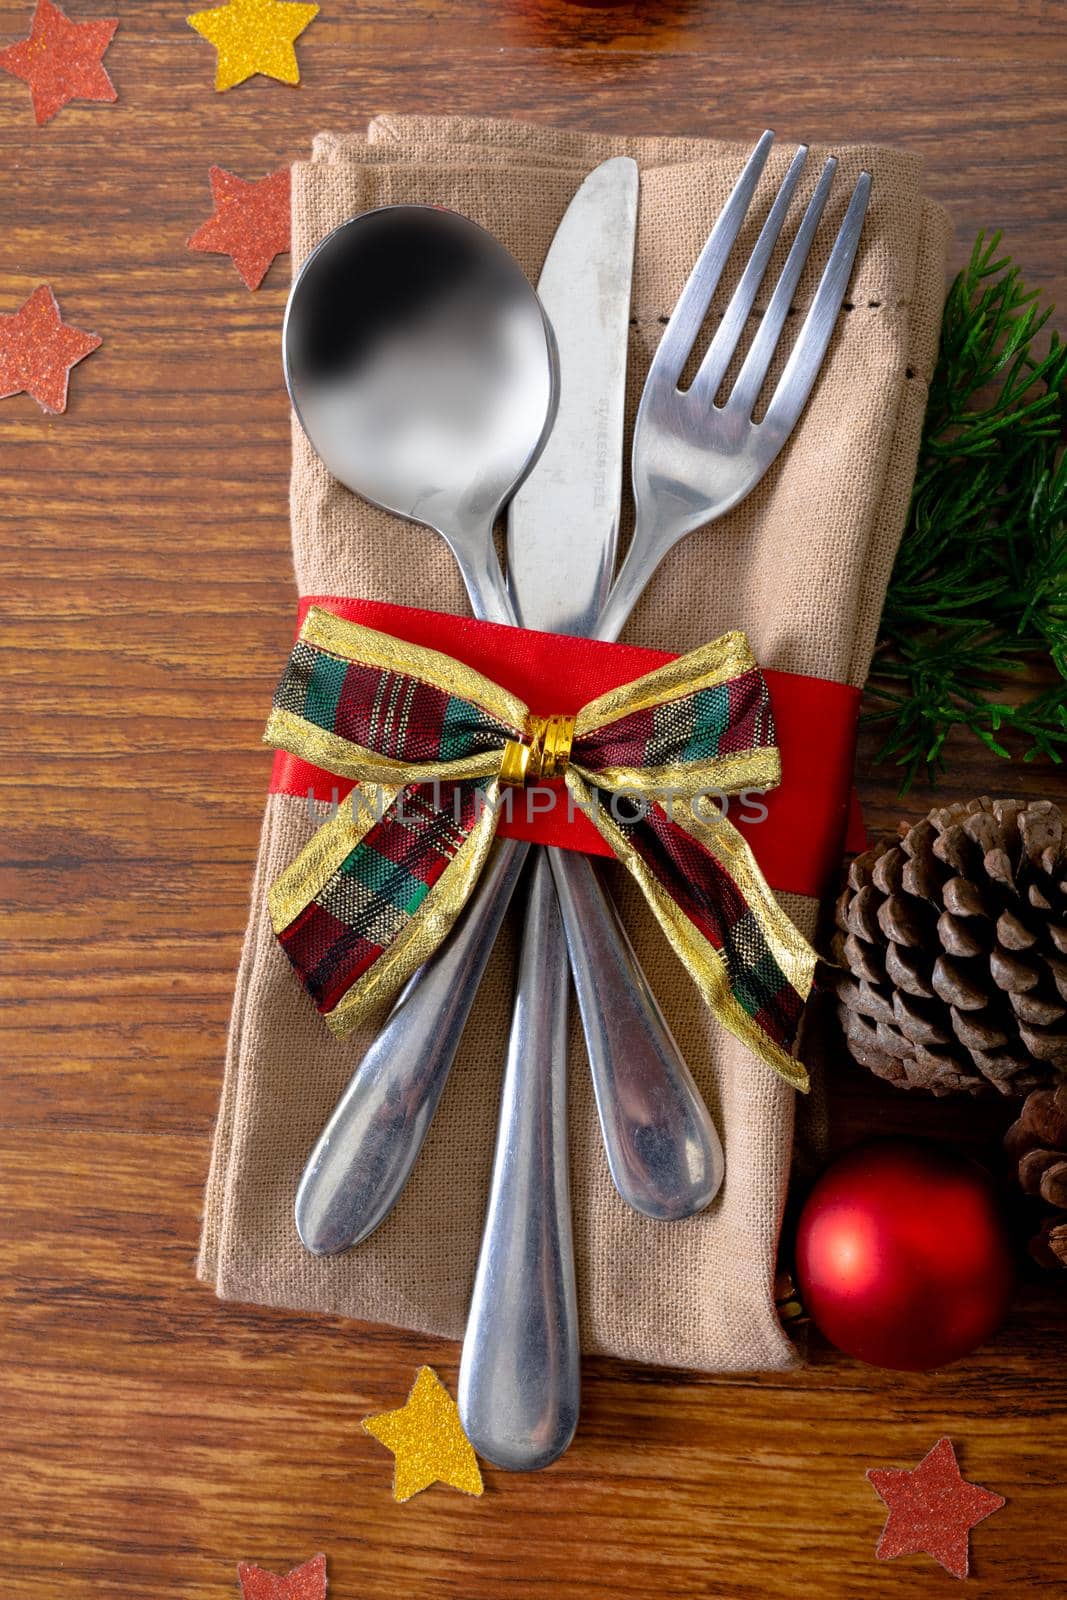 Composition of christmas decorations with cutlery and napkin tied with bow on wooden background. christmas, tradition and celebration concept.